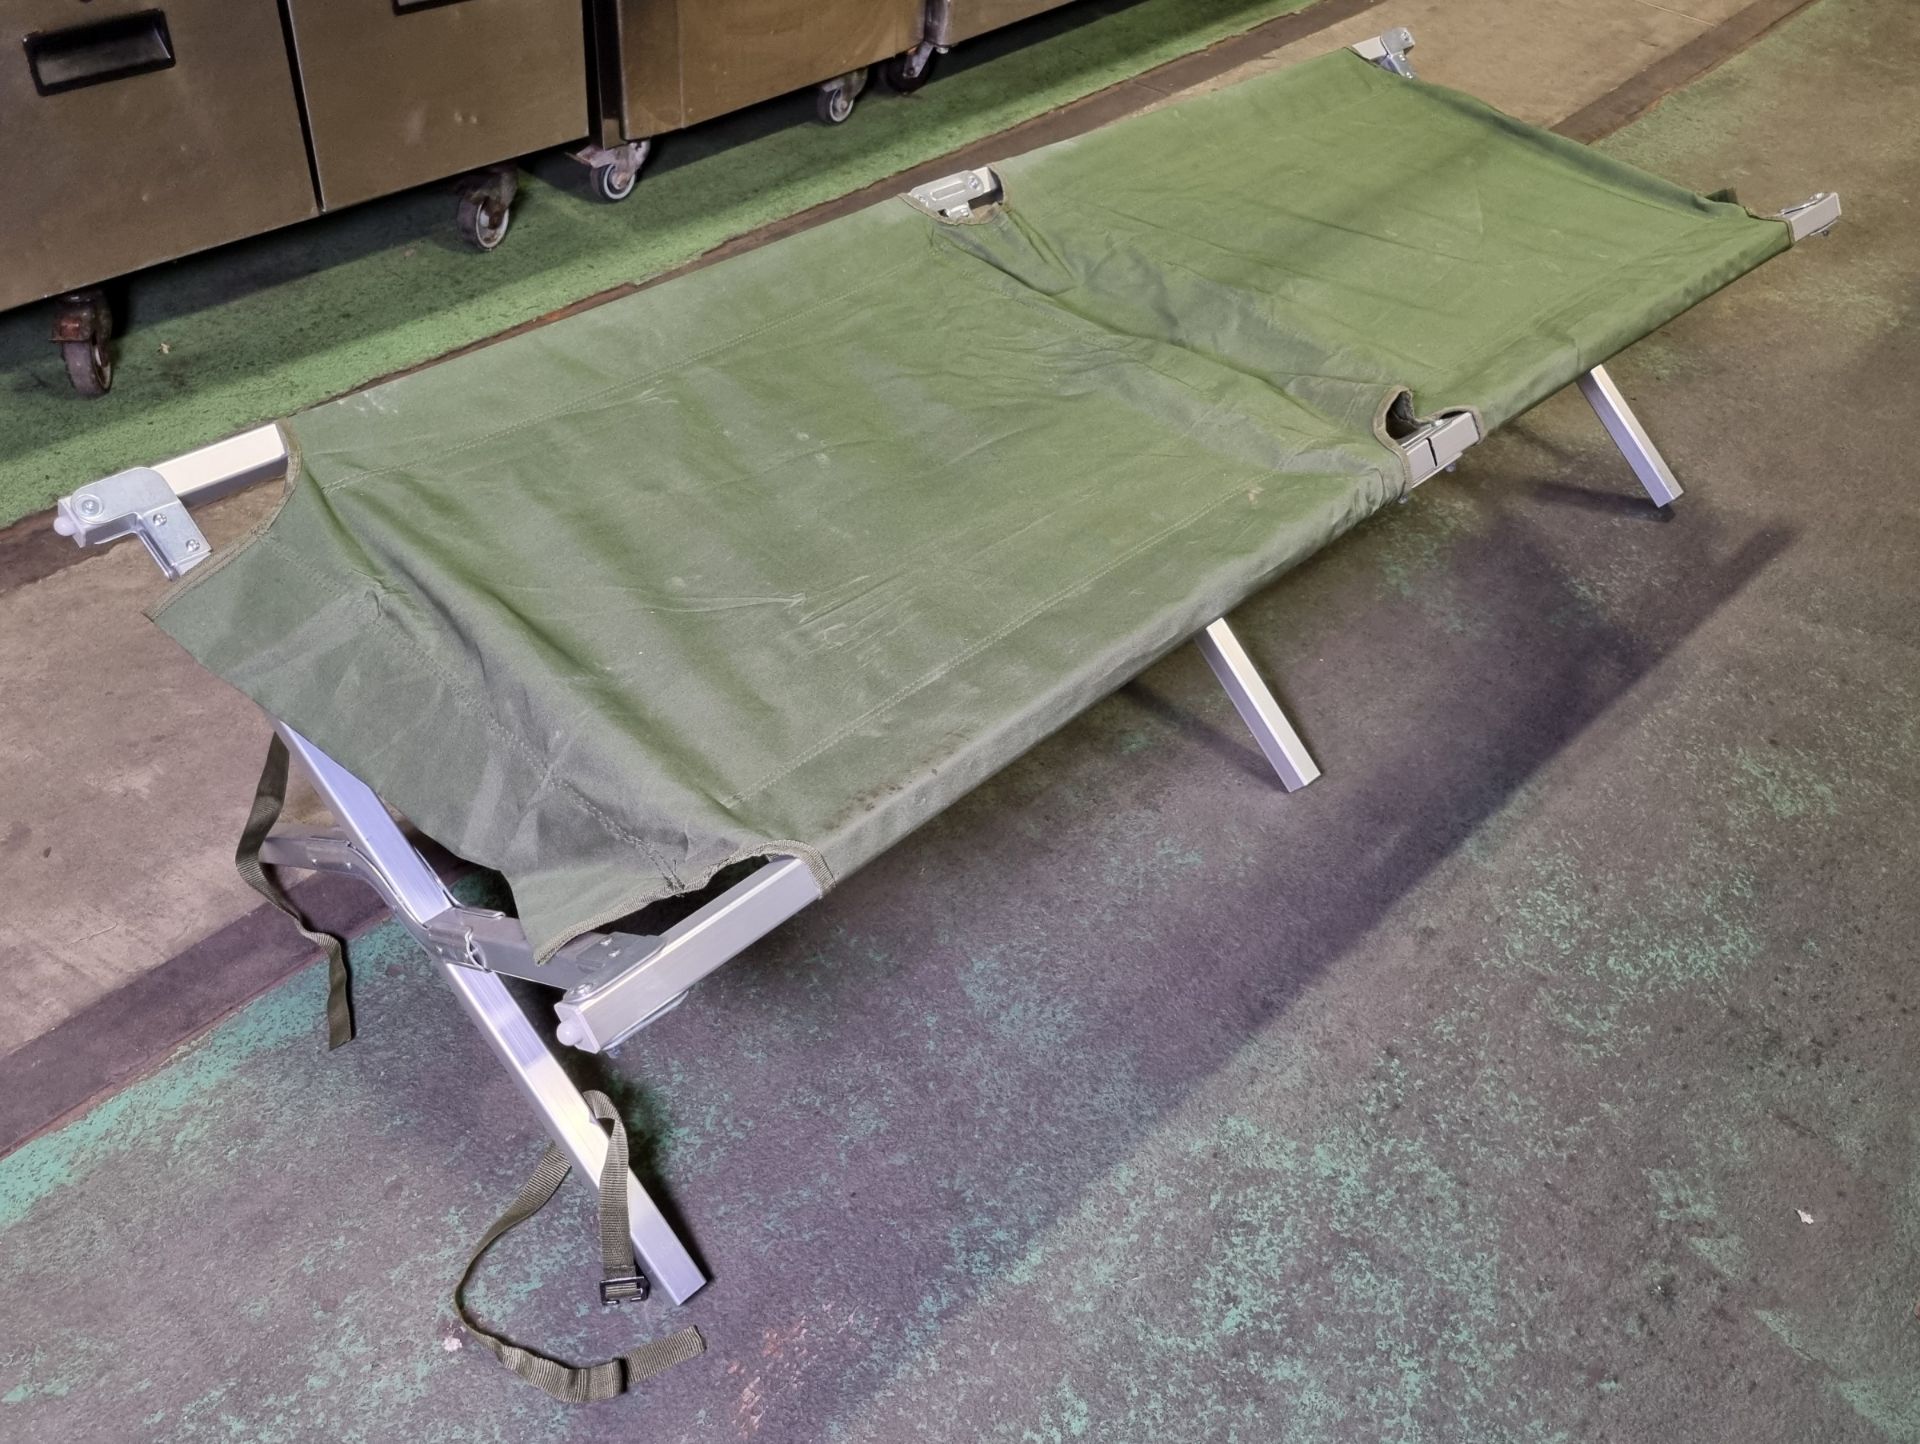 15x Folding field cots with carry bag - L 1900 x W 700 x H 450mm - Image 4 of 4